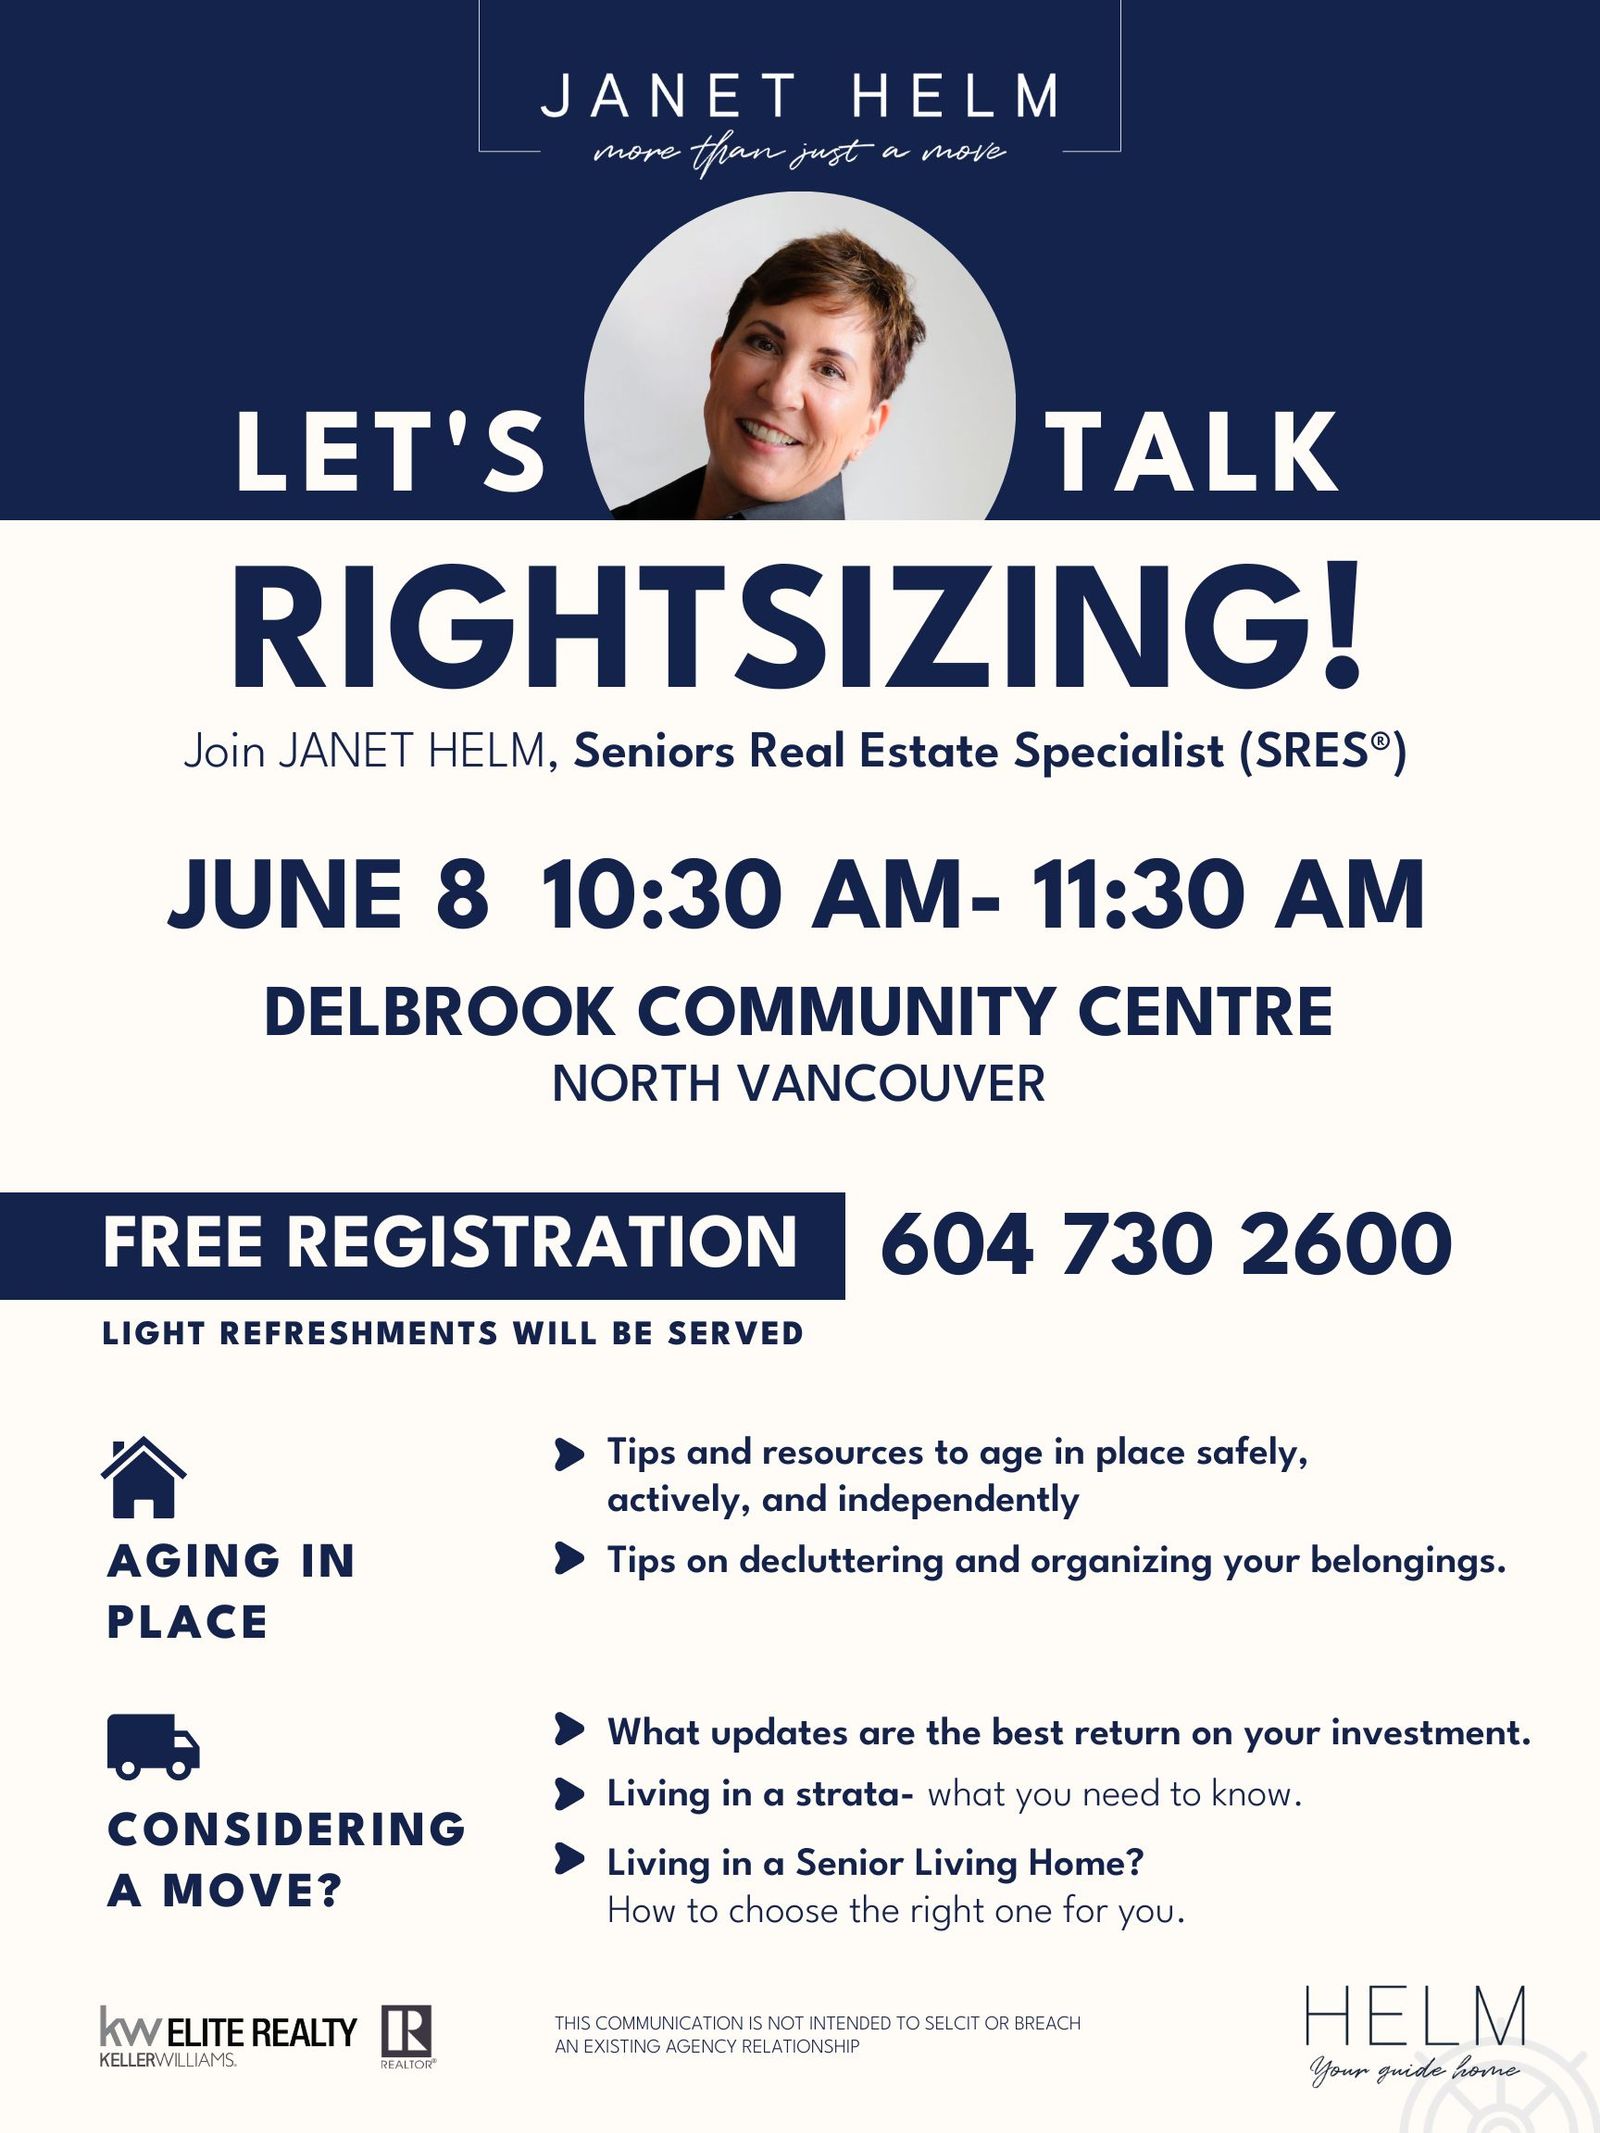 RIGHTSIZING SEMINAR IN NORTH VANCOUVER 